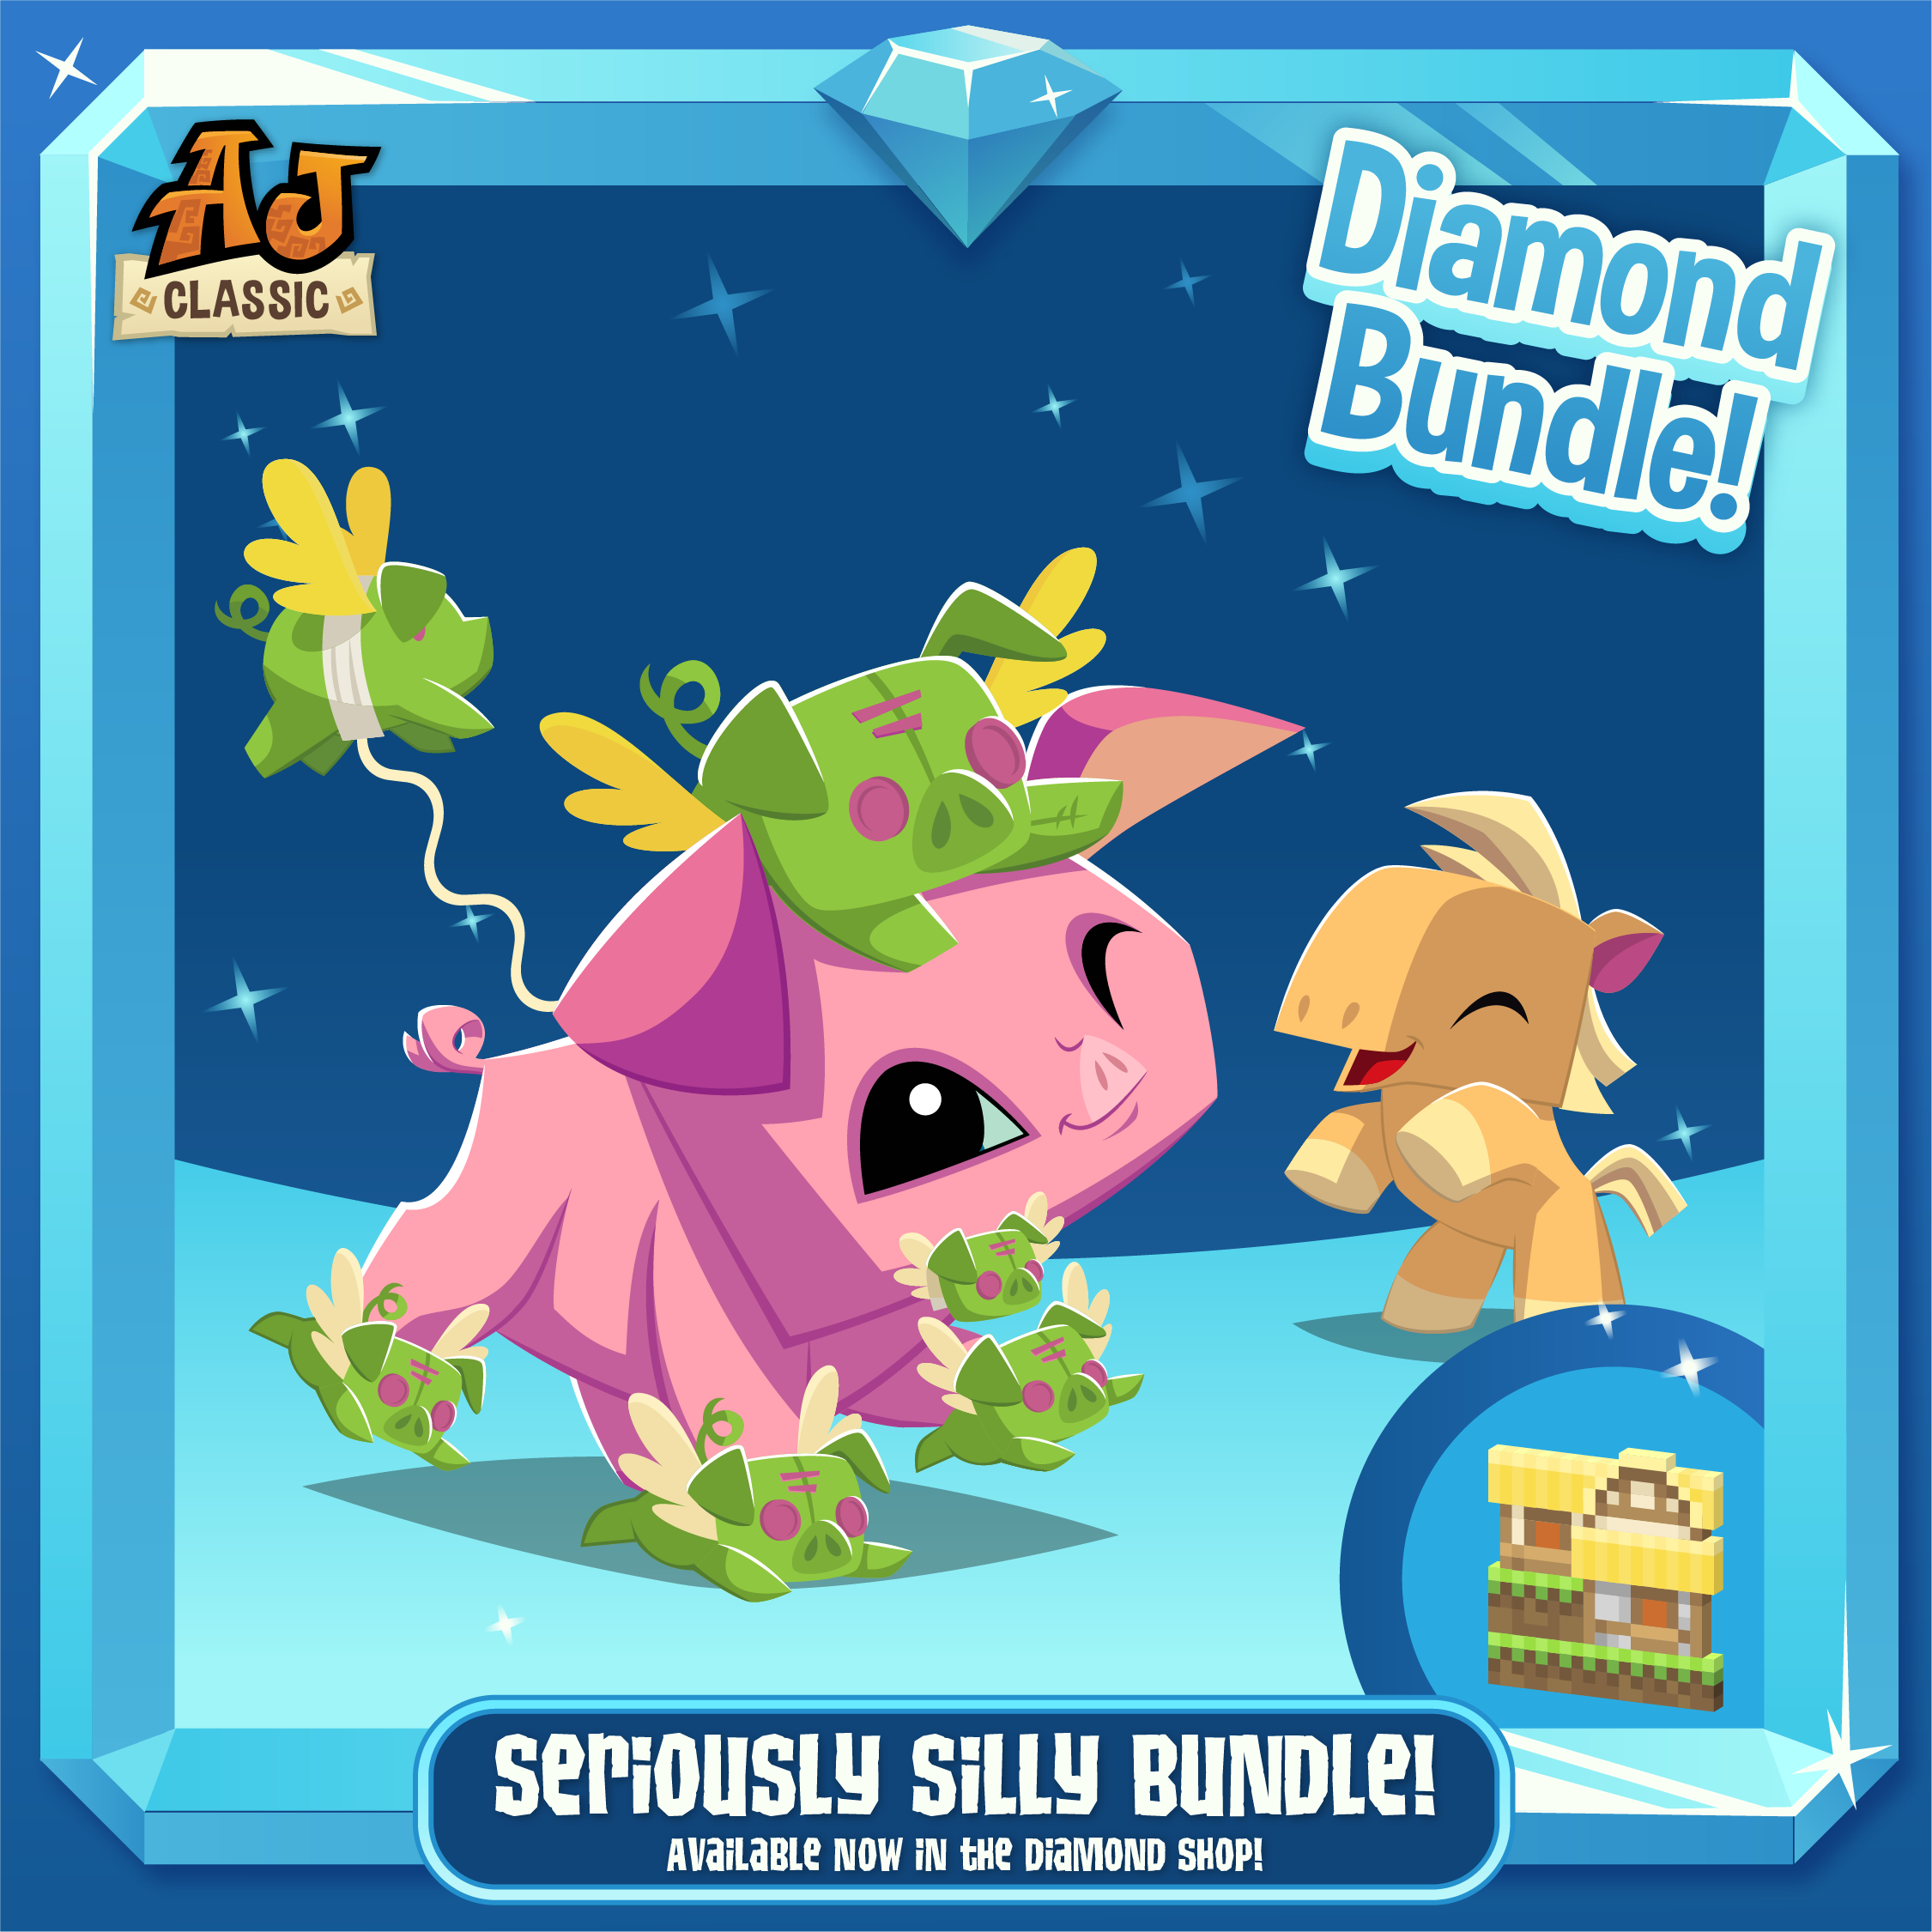 20220328 Seriously Silly Bundle Classic-02